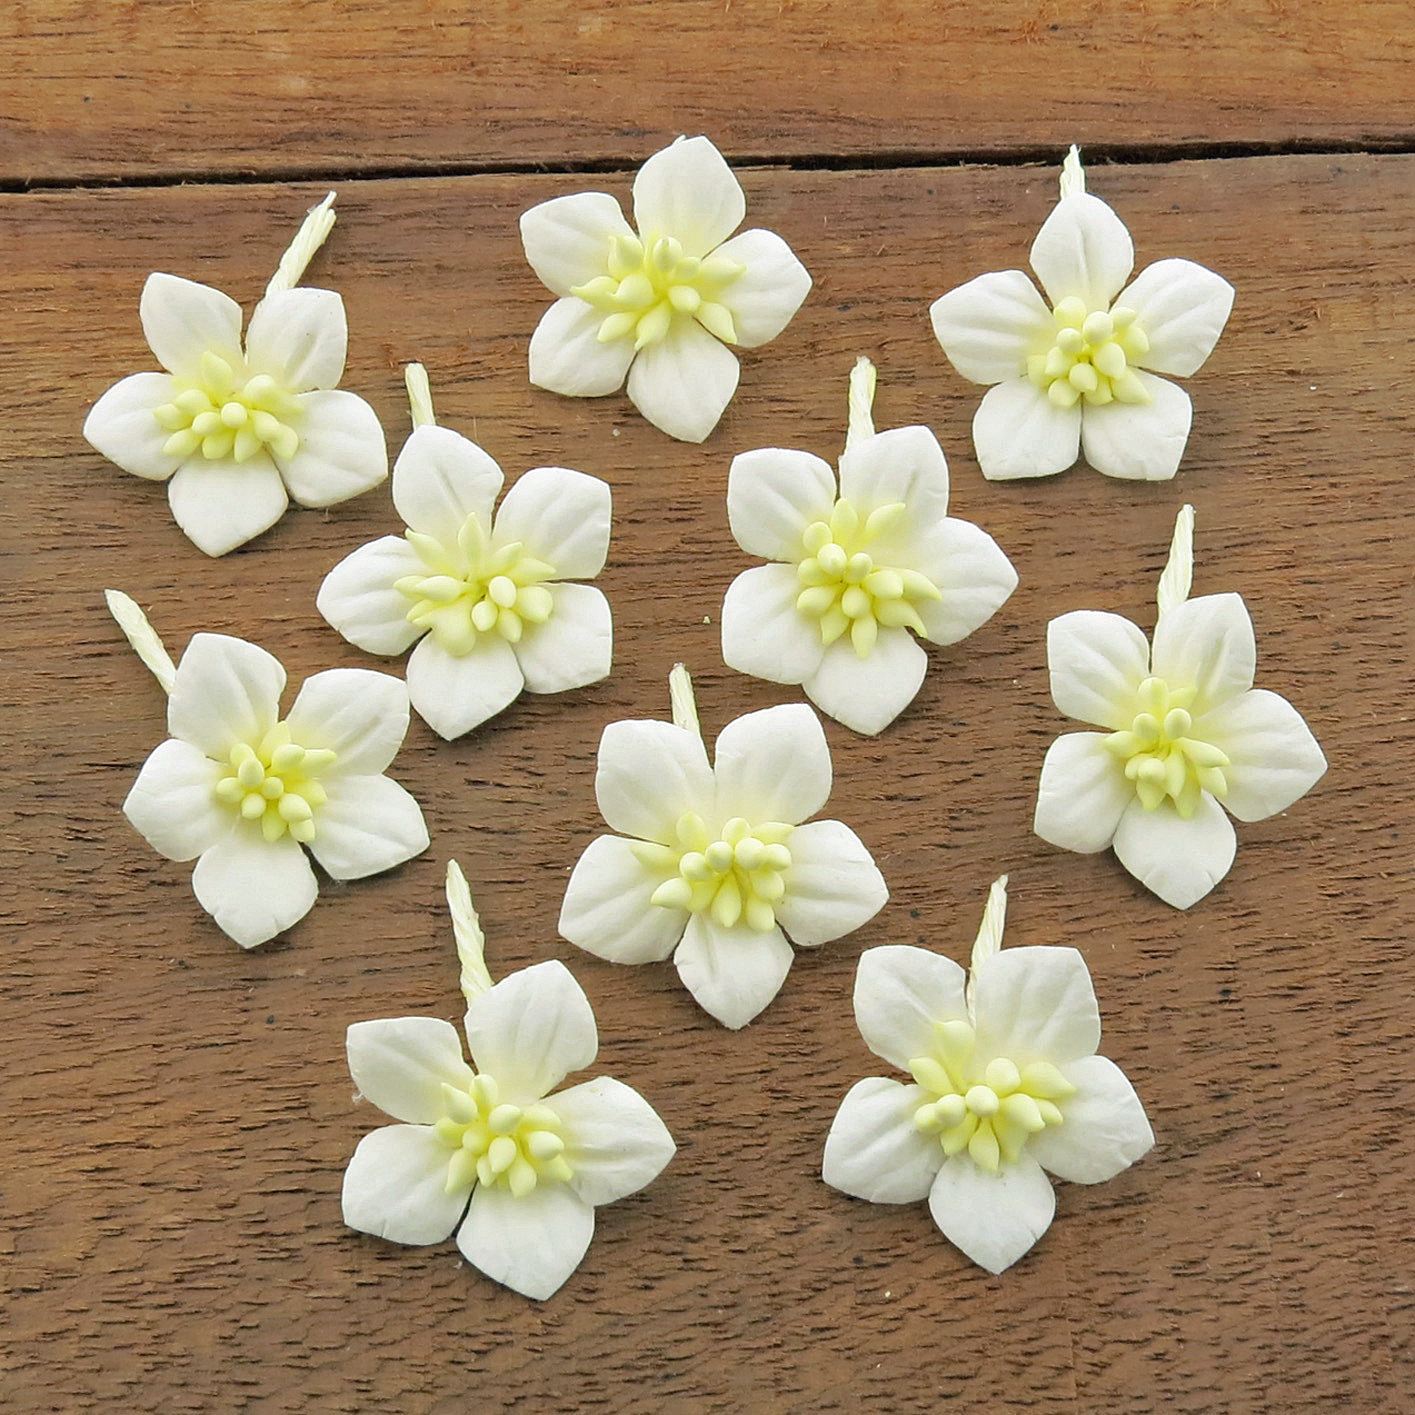 WHITE COTTON STEM MULBERRY PAPER FLOWERS - SET C - Click Image to Close